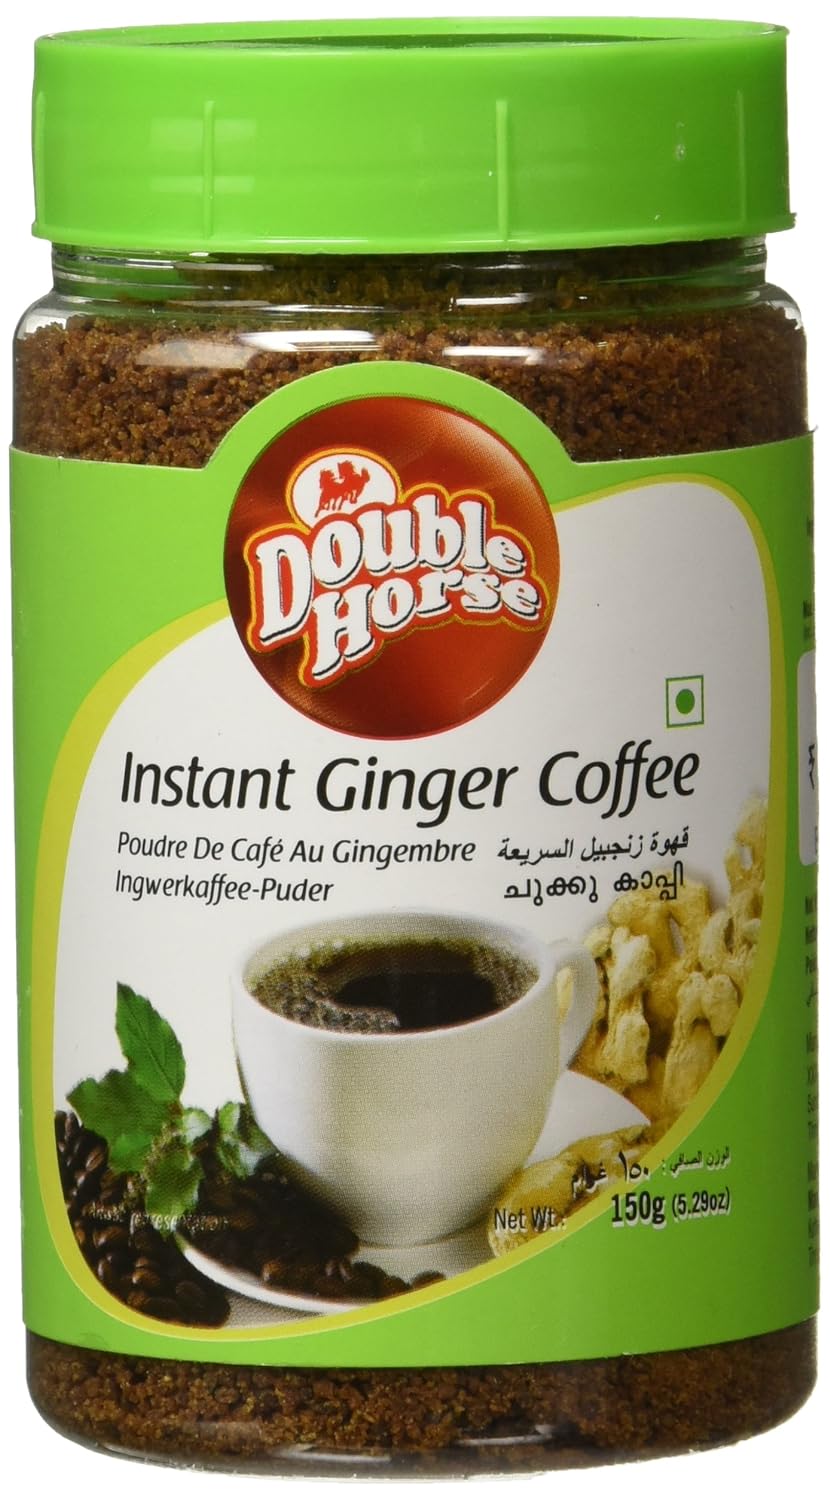 Double Horse Instant Ginger Coffee, 150g